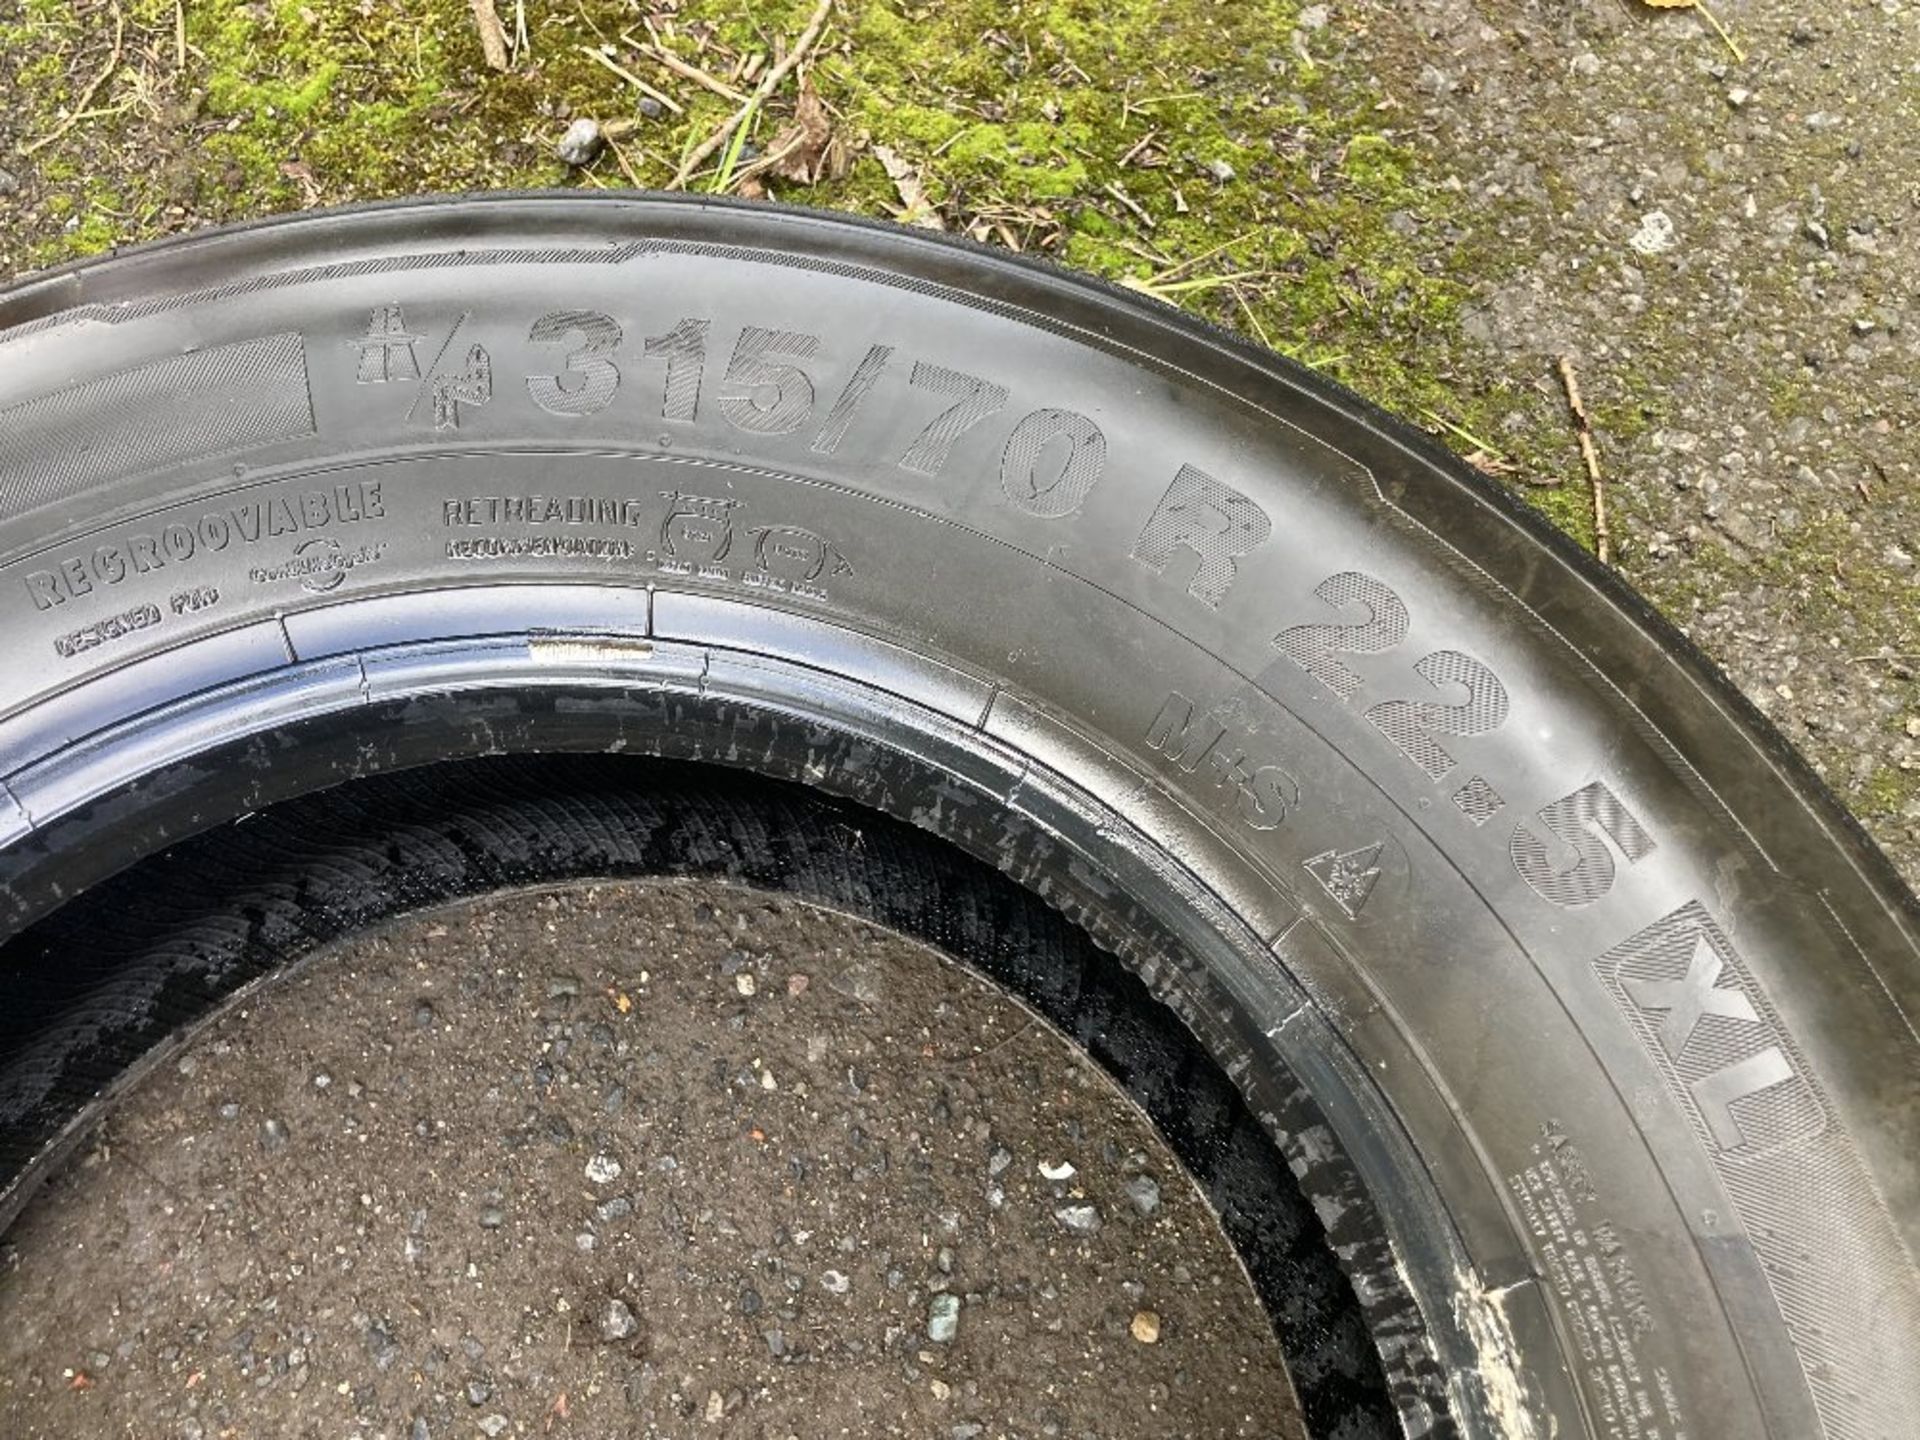 Continental Conti Hybrid HS3 XL 315/70R 22.5 radial tubeless regroovable HGV tyre - Image 6 of 6